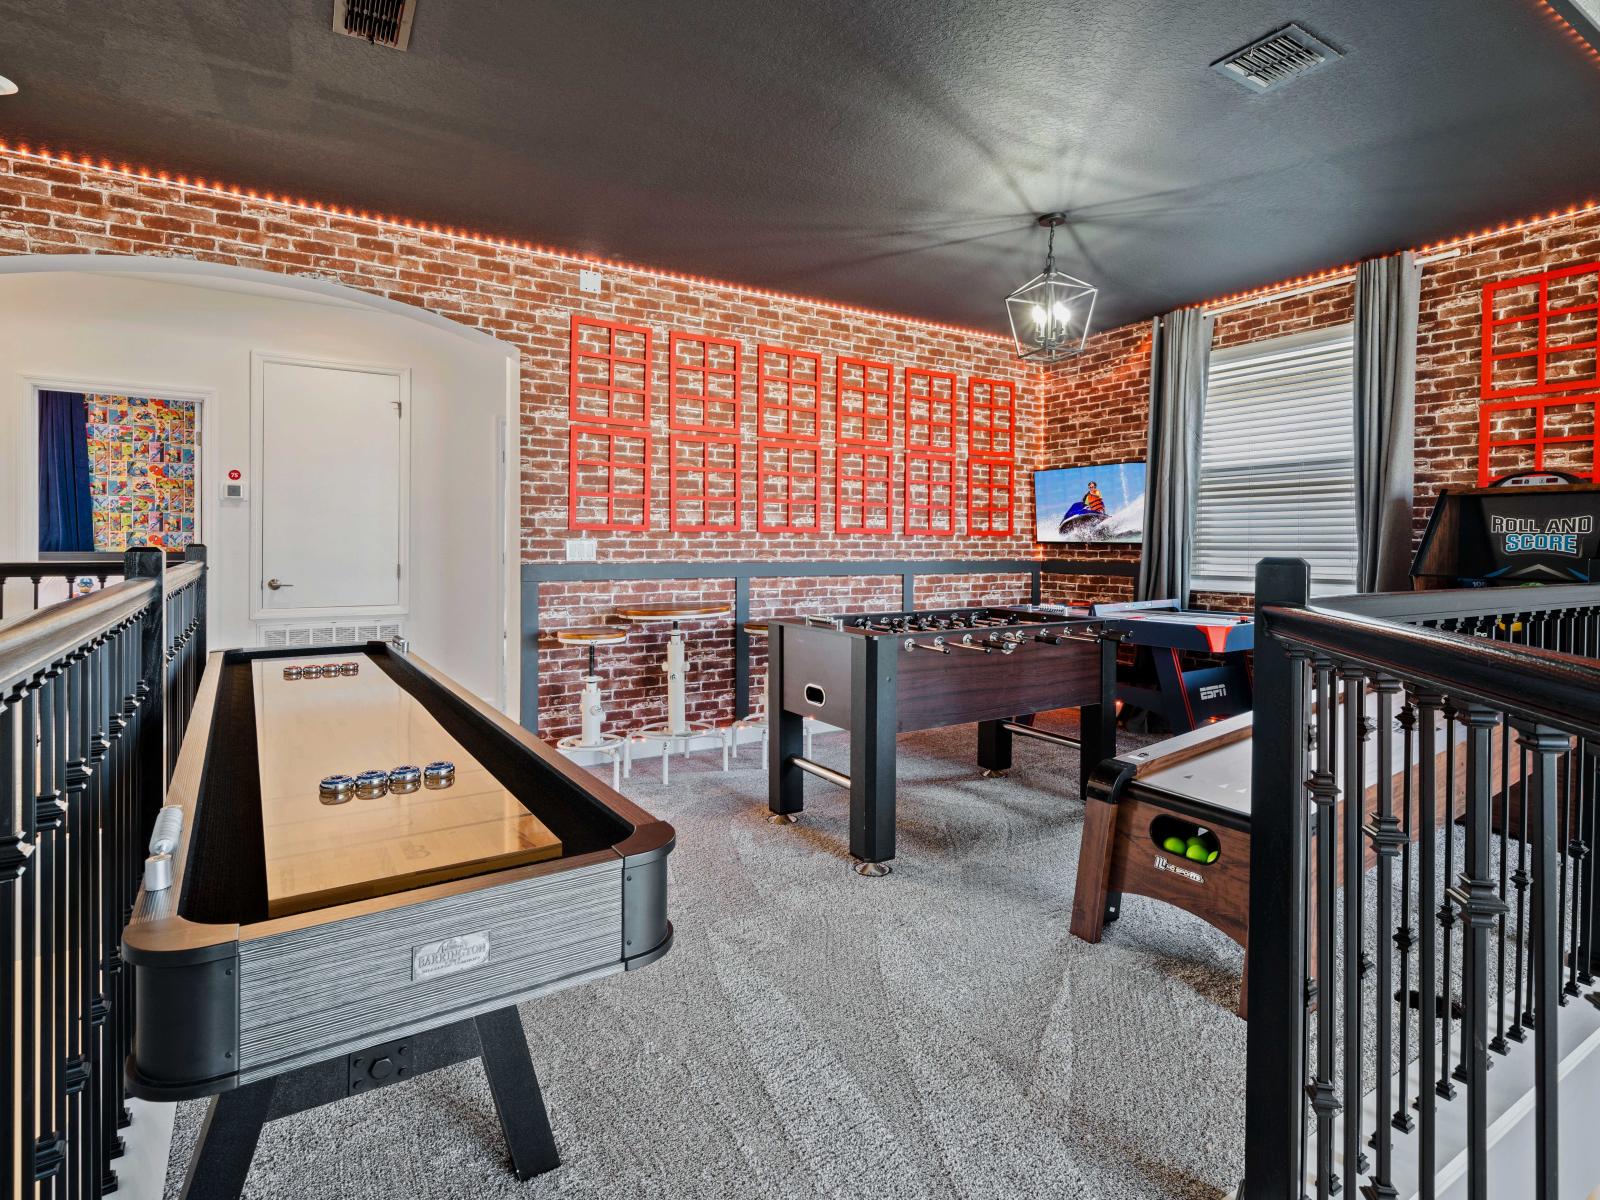 Game area Shuffleboard Table of the Home in Davenport Florida - Play Foosball or Shuffleboard and have fun time - Unwind in style